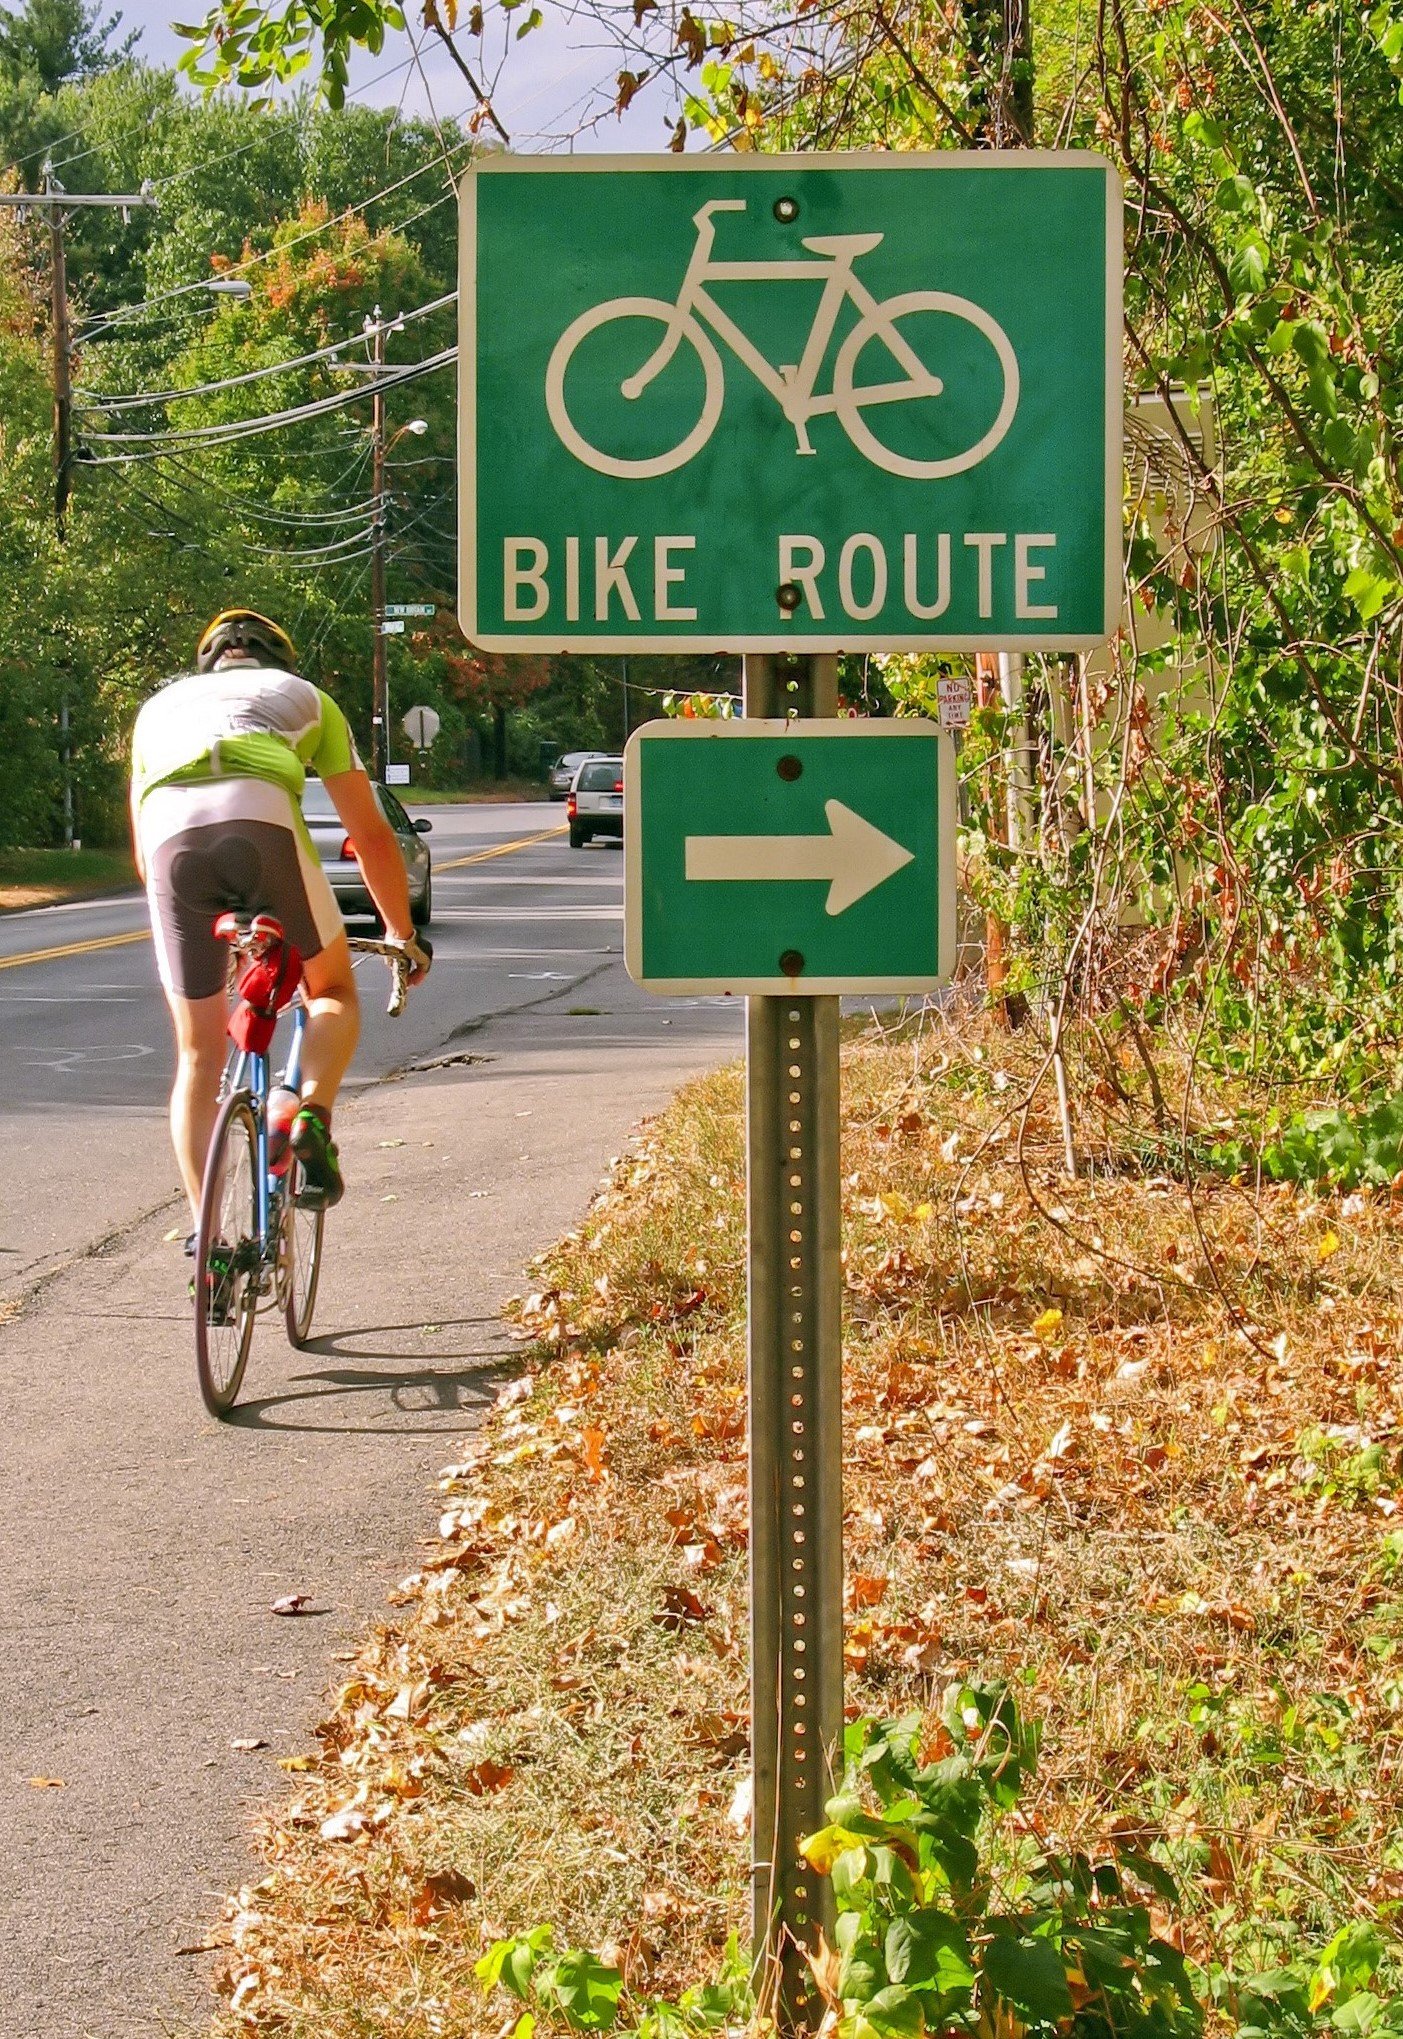 a-green-bike-route-sign-on-the-side-of-the-road-edited.jpg